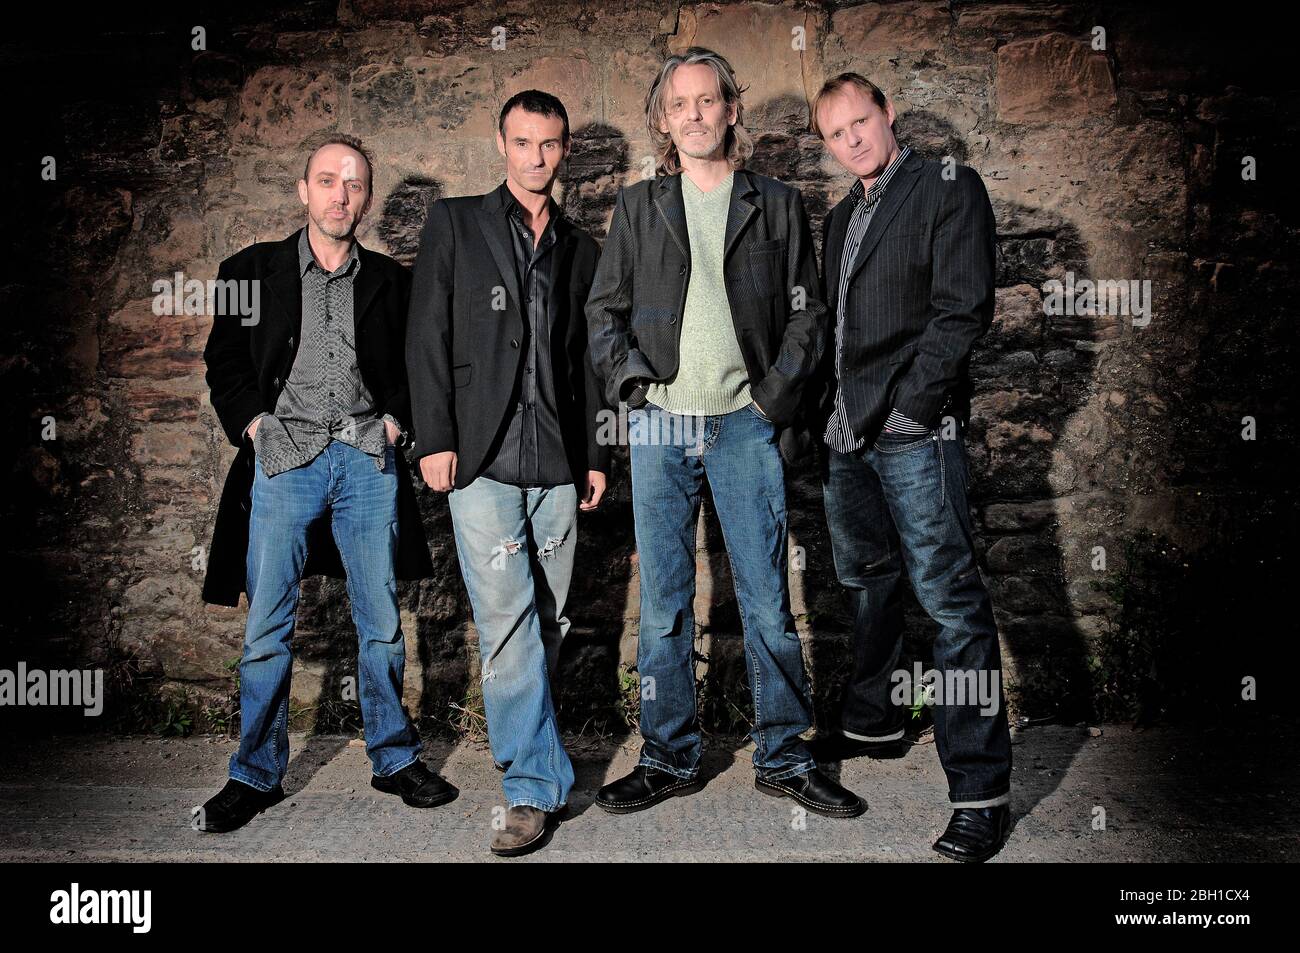 WET,WET,WET Photographs by Alan Peebles from the left.. Neil Mitchell (keyboards,vocals), Marti Pellow (vocals), and Graeme Clark (Bass, vocals). Tomm Stock Photo